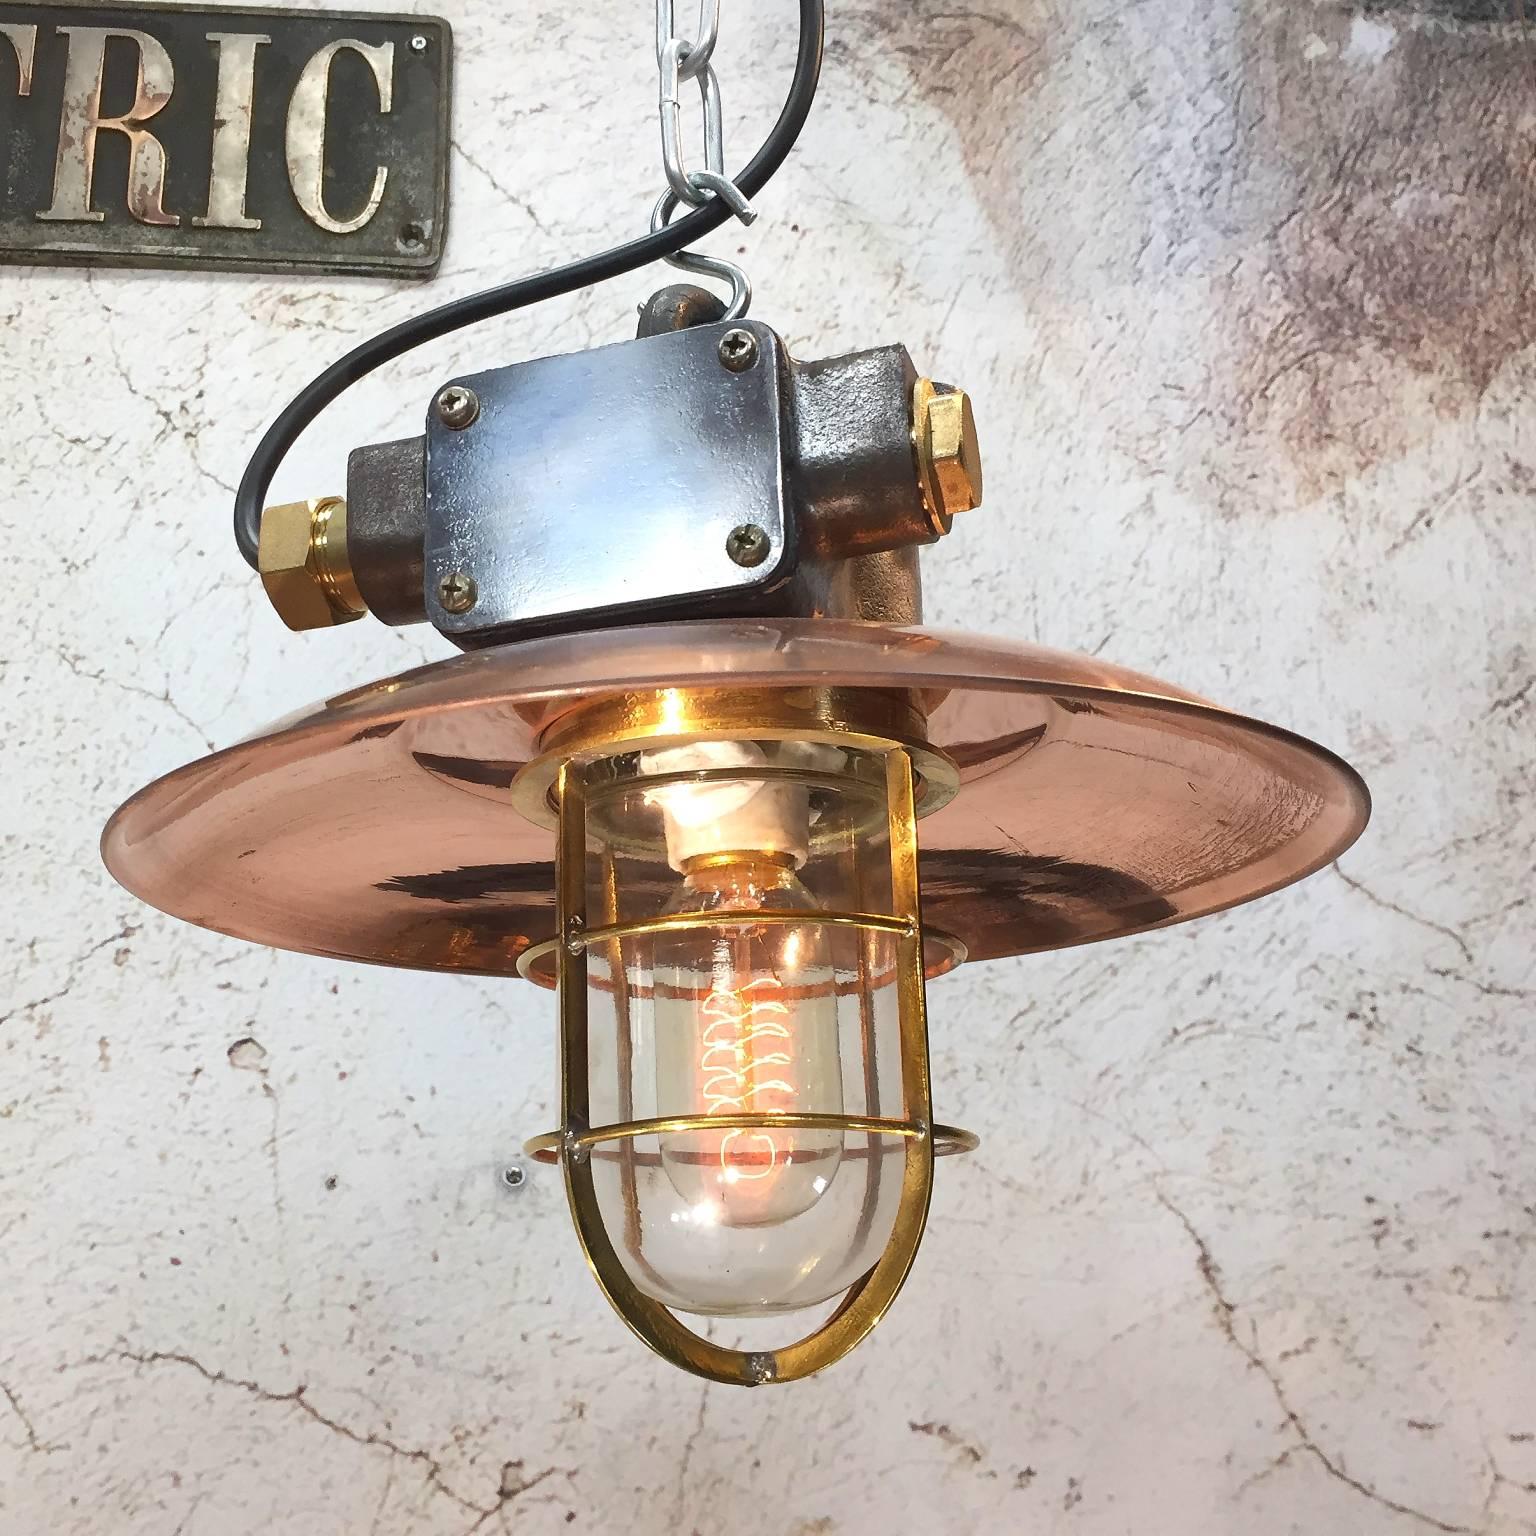 Cast Mid-Century Iron & Copper Explosion Proof Pendant with Glass Dome & Edison Bulb